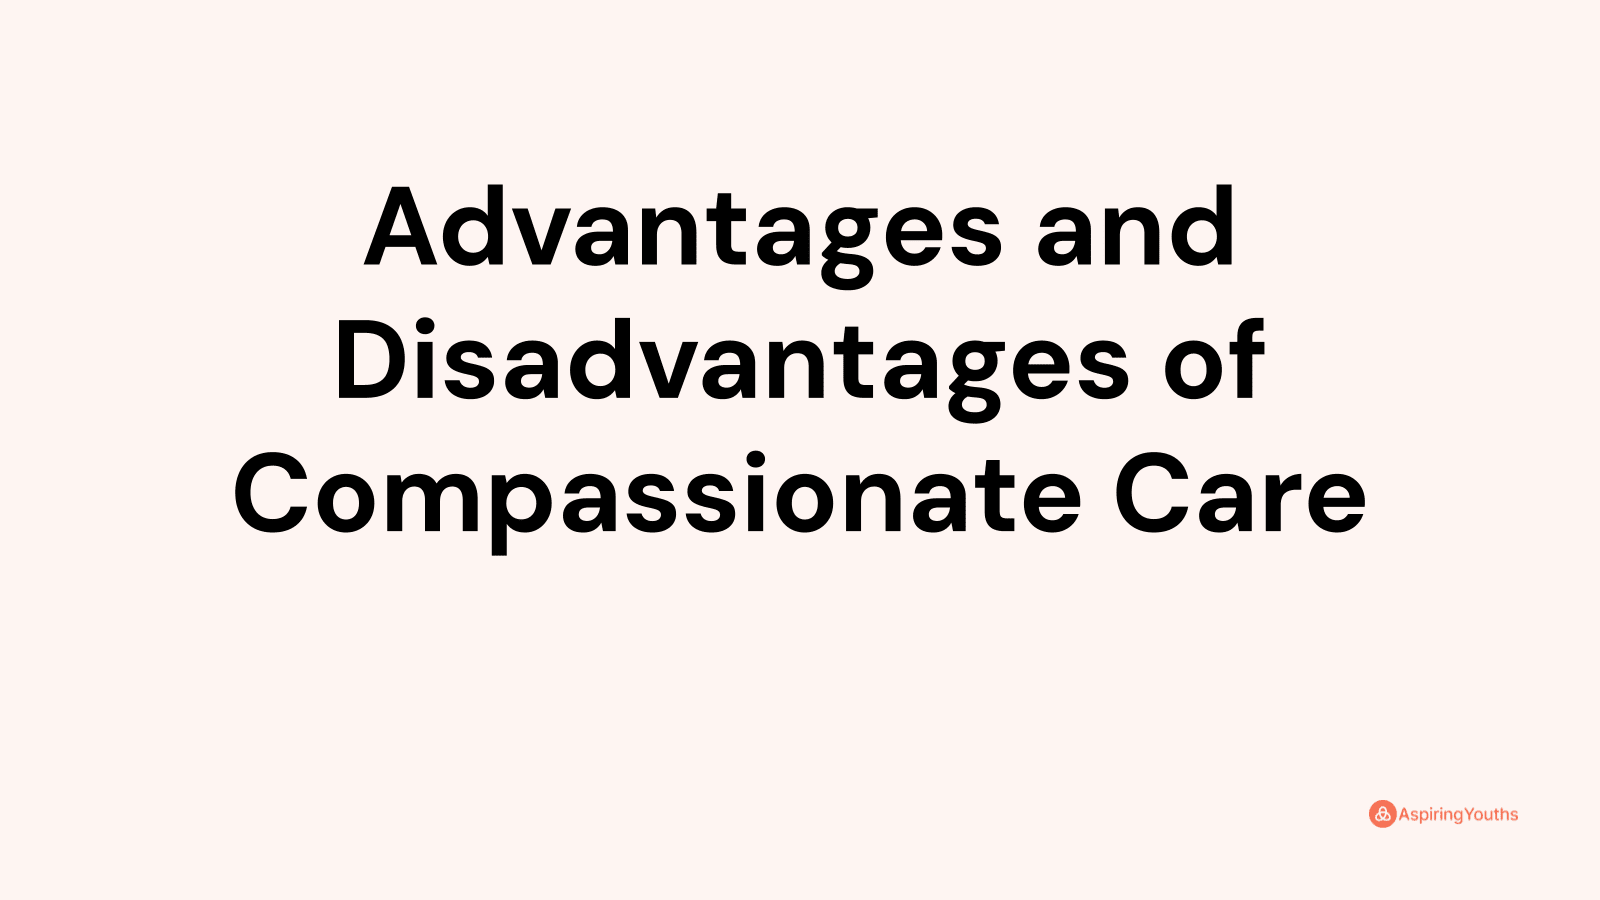 Advantages and disadvantages of Compassionate Care